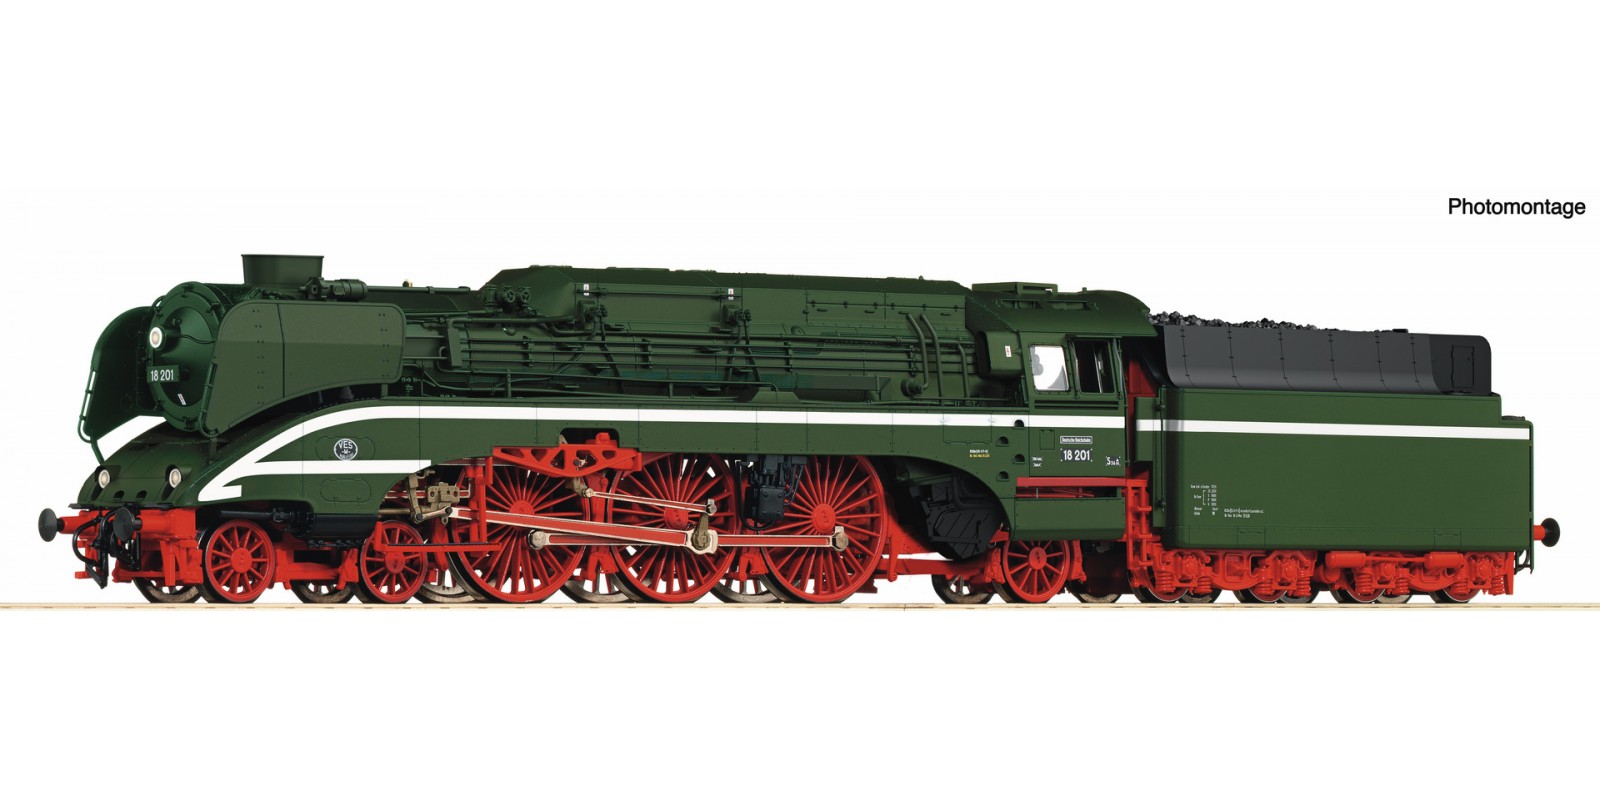 RO7110006 High-speed steam locomoti ve 18 201, coil-fired, DR